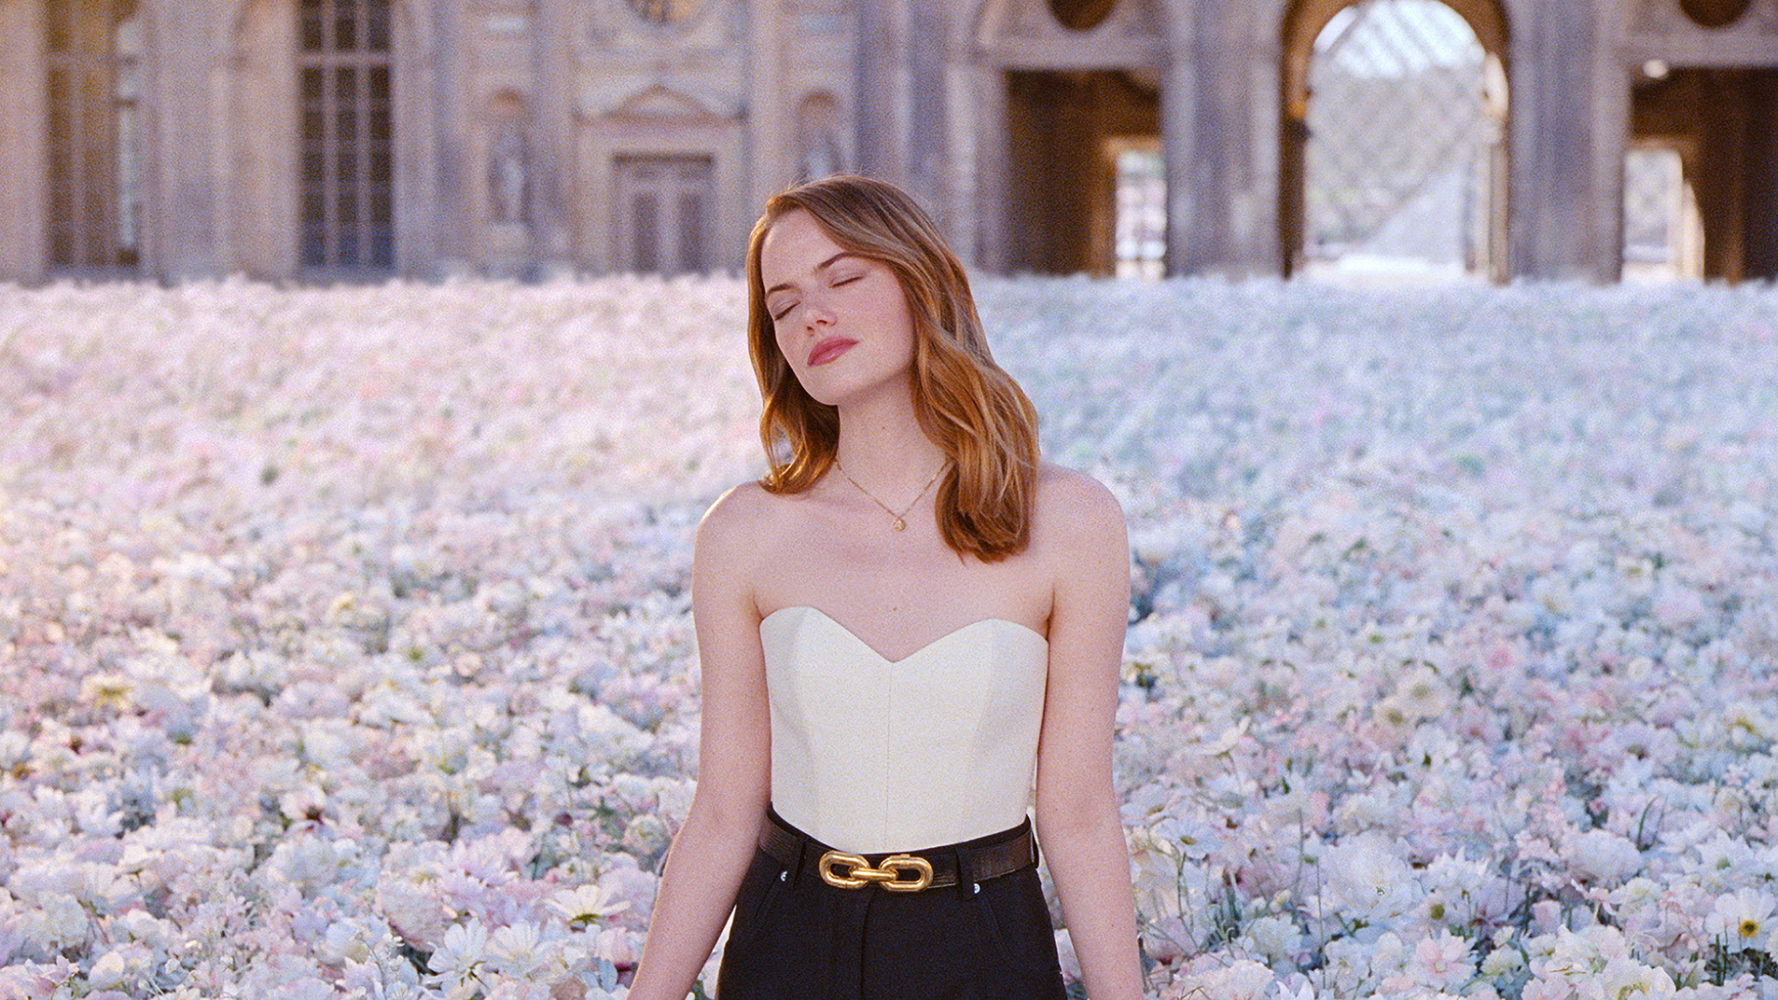 Emma Stone Is in Full Bloom for Louis Vuitton 'Coeur Battant' Ad